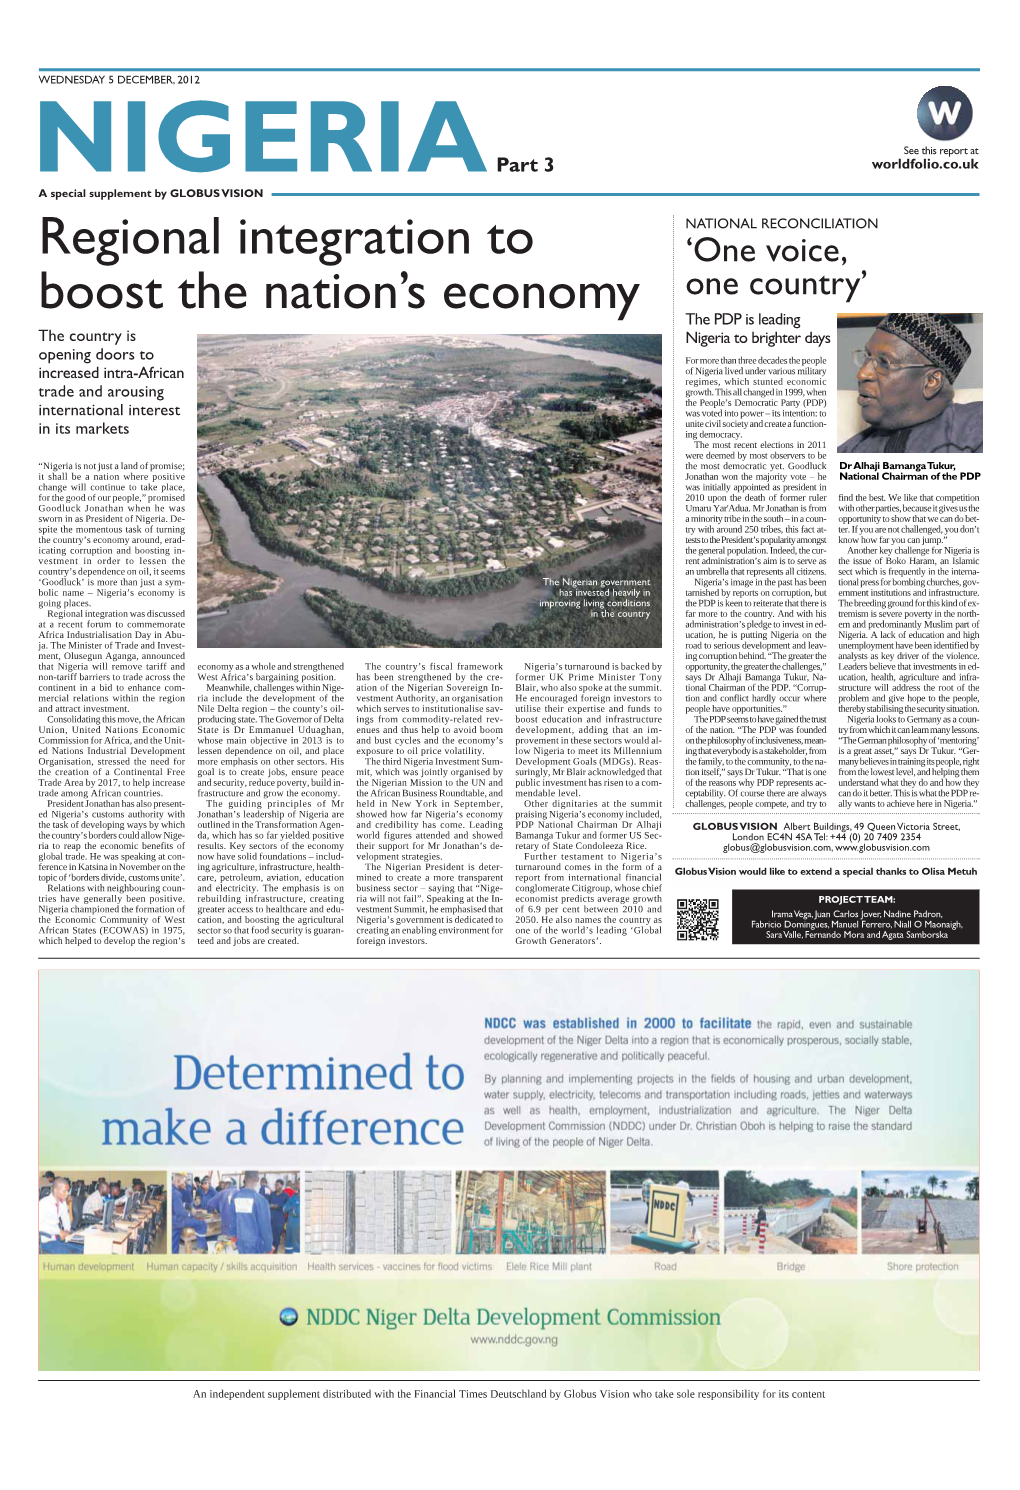 NIGERIA Part 3 Worldfolio.Co.Uk a Special Supplement by GLOBUS VISION